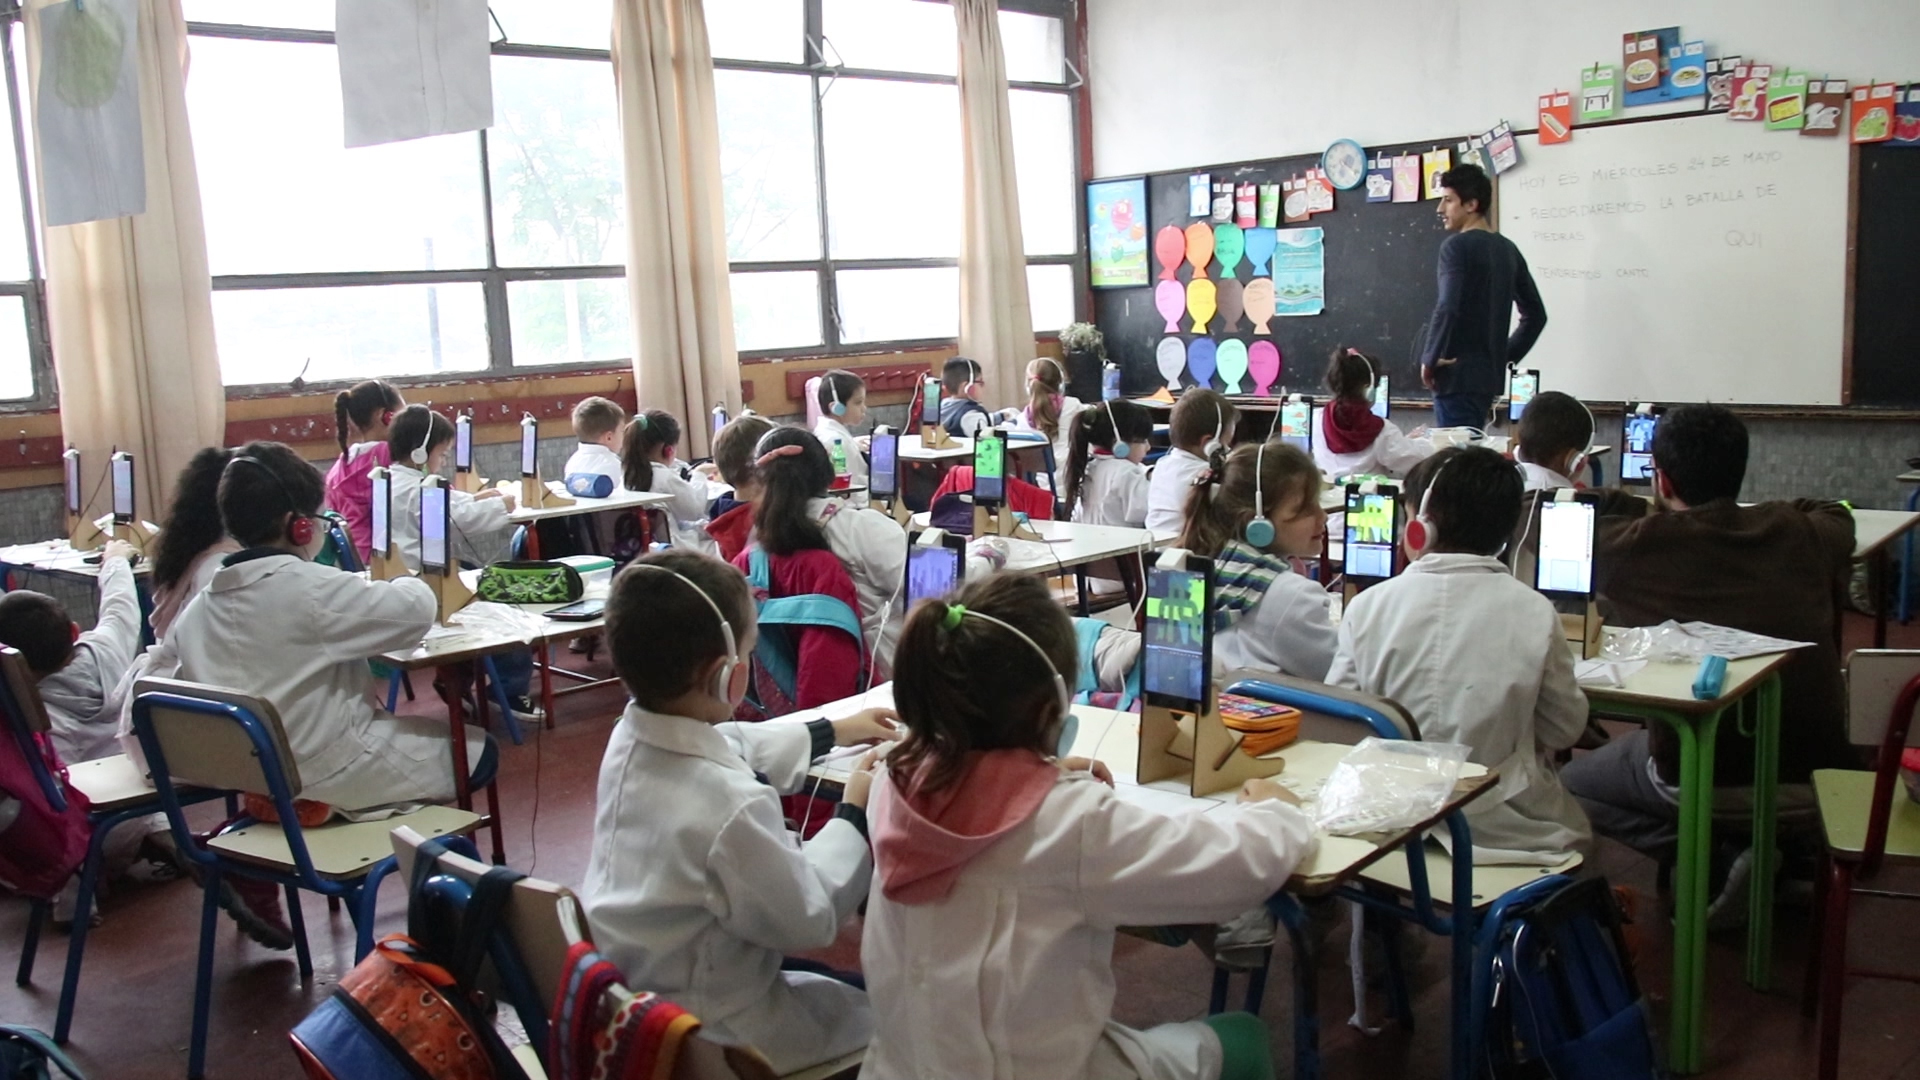 Photo taken during mathematics training with CETA system using tangibles. In this photo we observe an entire first grade classroom with 22 young children, playing with the blocks using our system CETA. Each child has a headphone, a tablet located on the table and the blocks to solve the additive composition tasks.